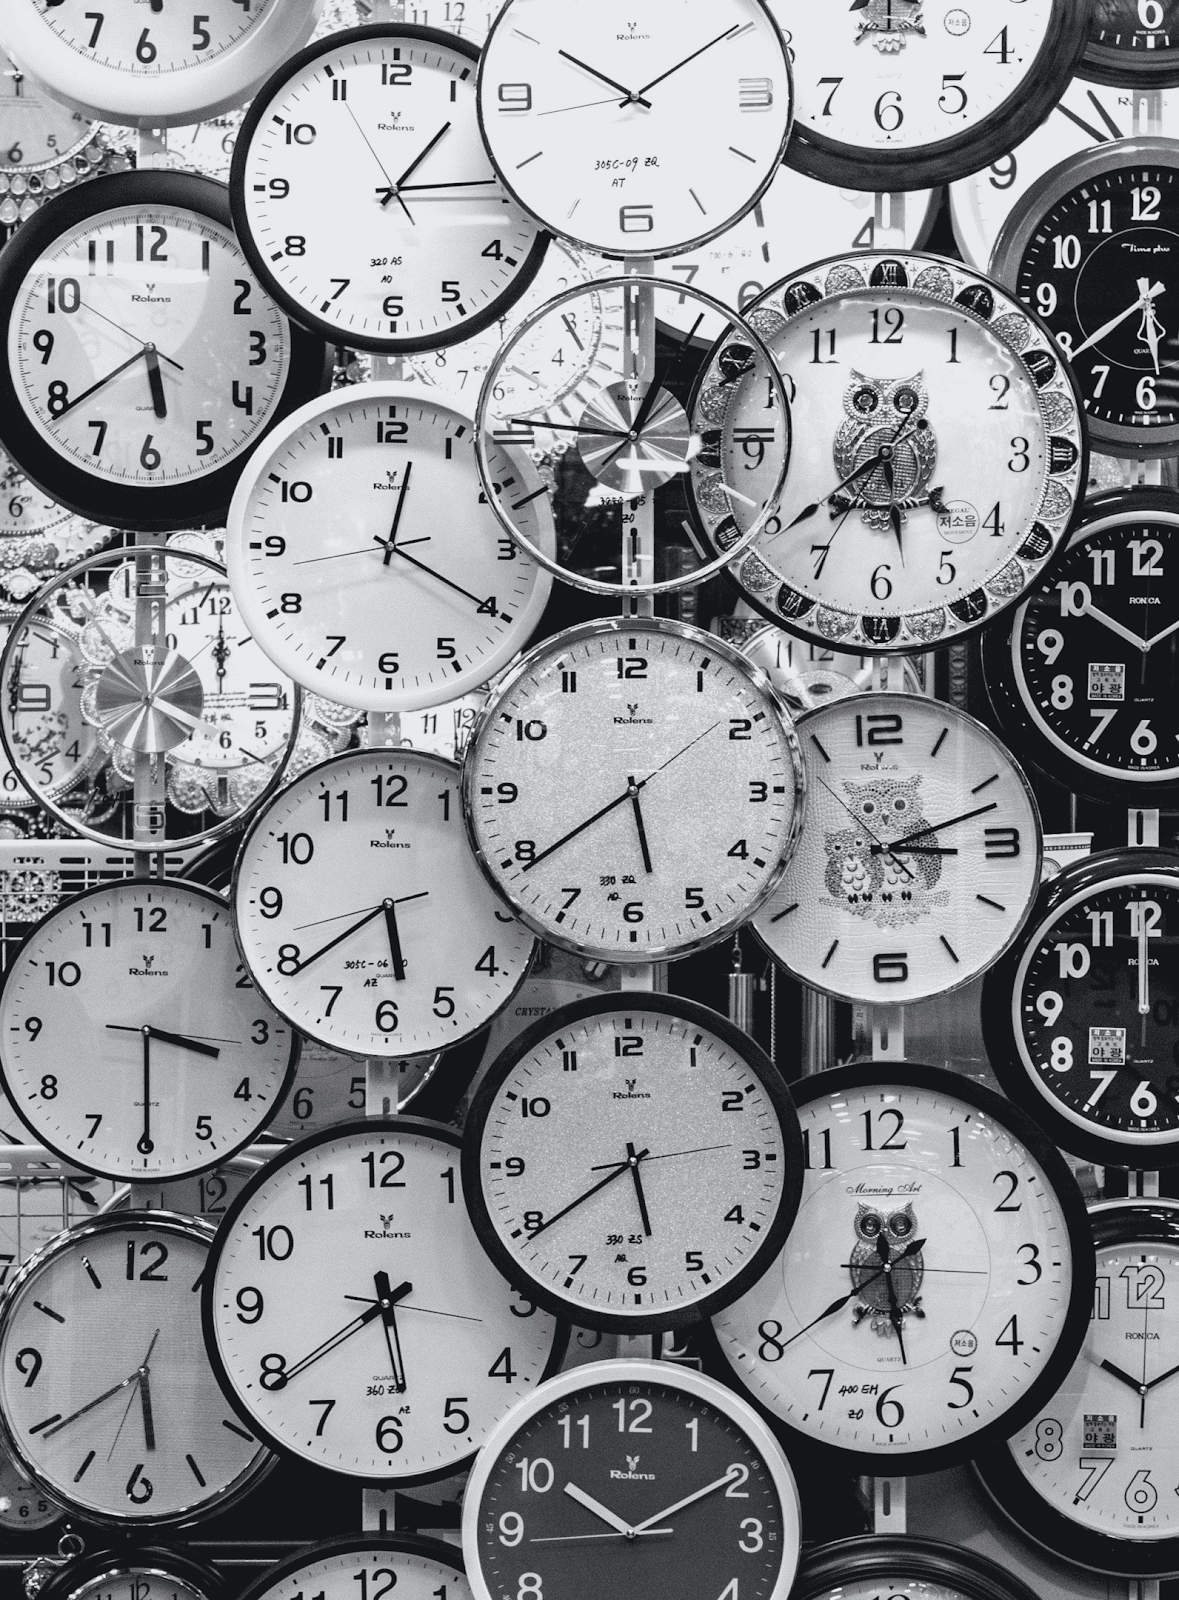 clocks representing time-tracking software